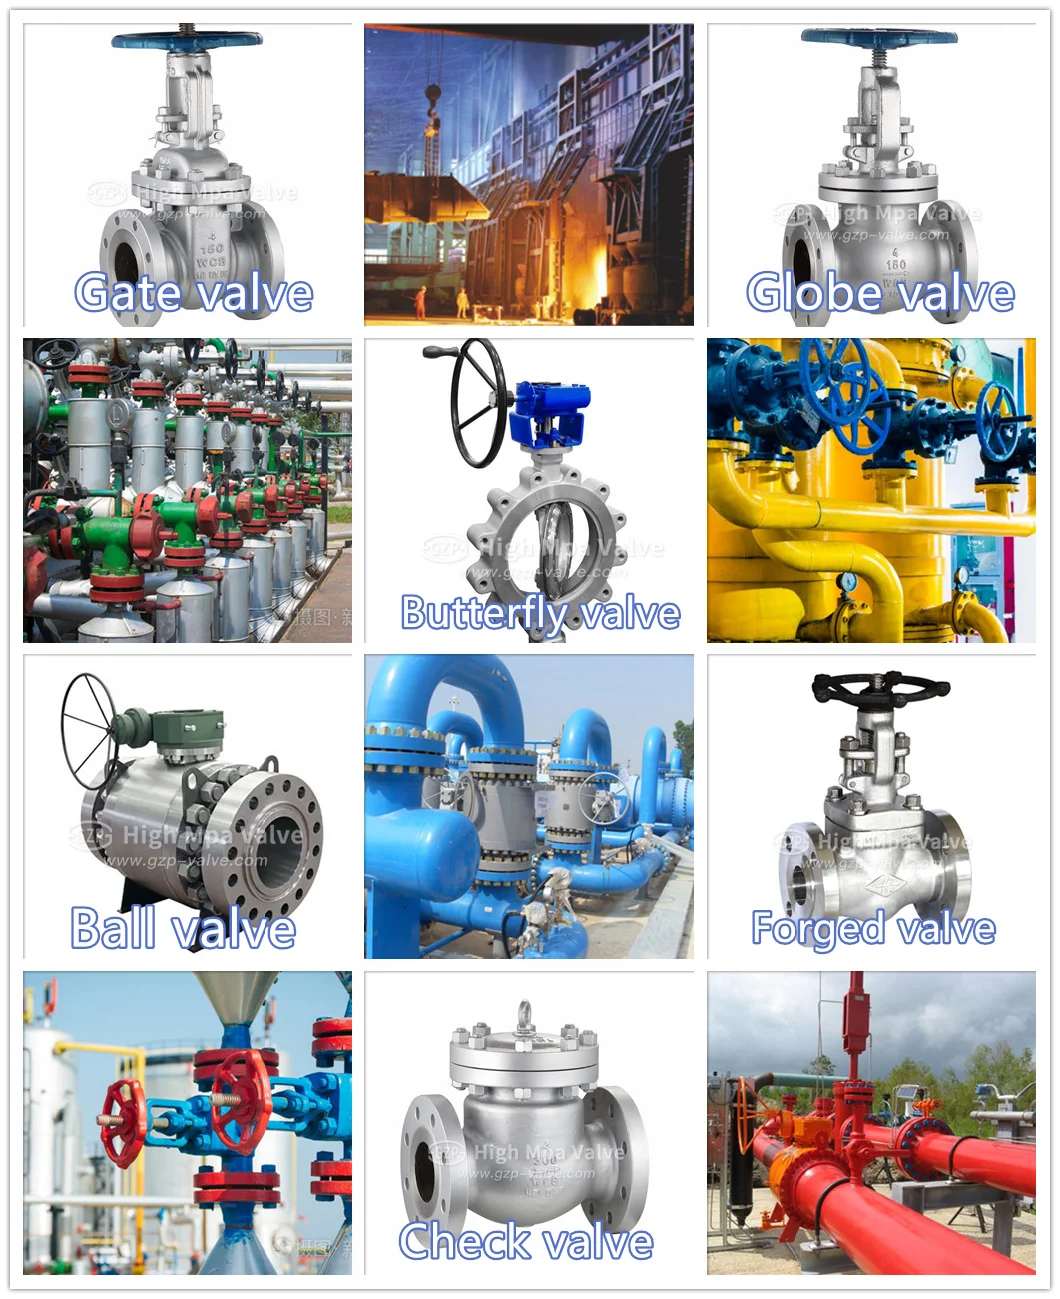 High Temperature A105 EPDM Viton OS&Y Forge Steel Globe Valve with Flange FF, RF, Rtj Ends